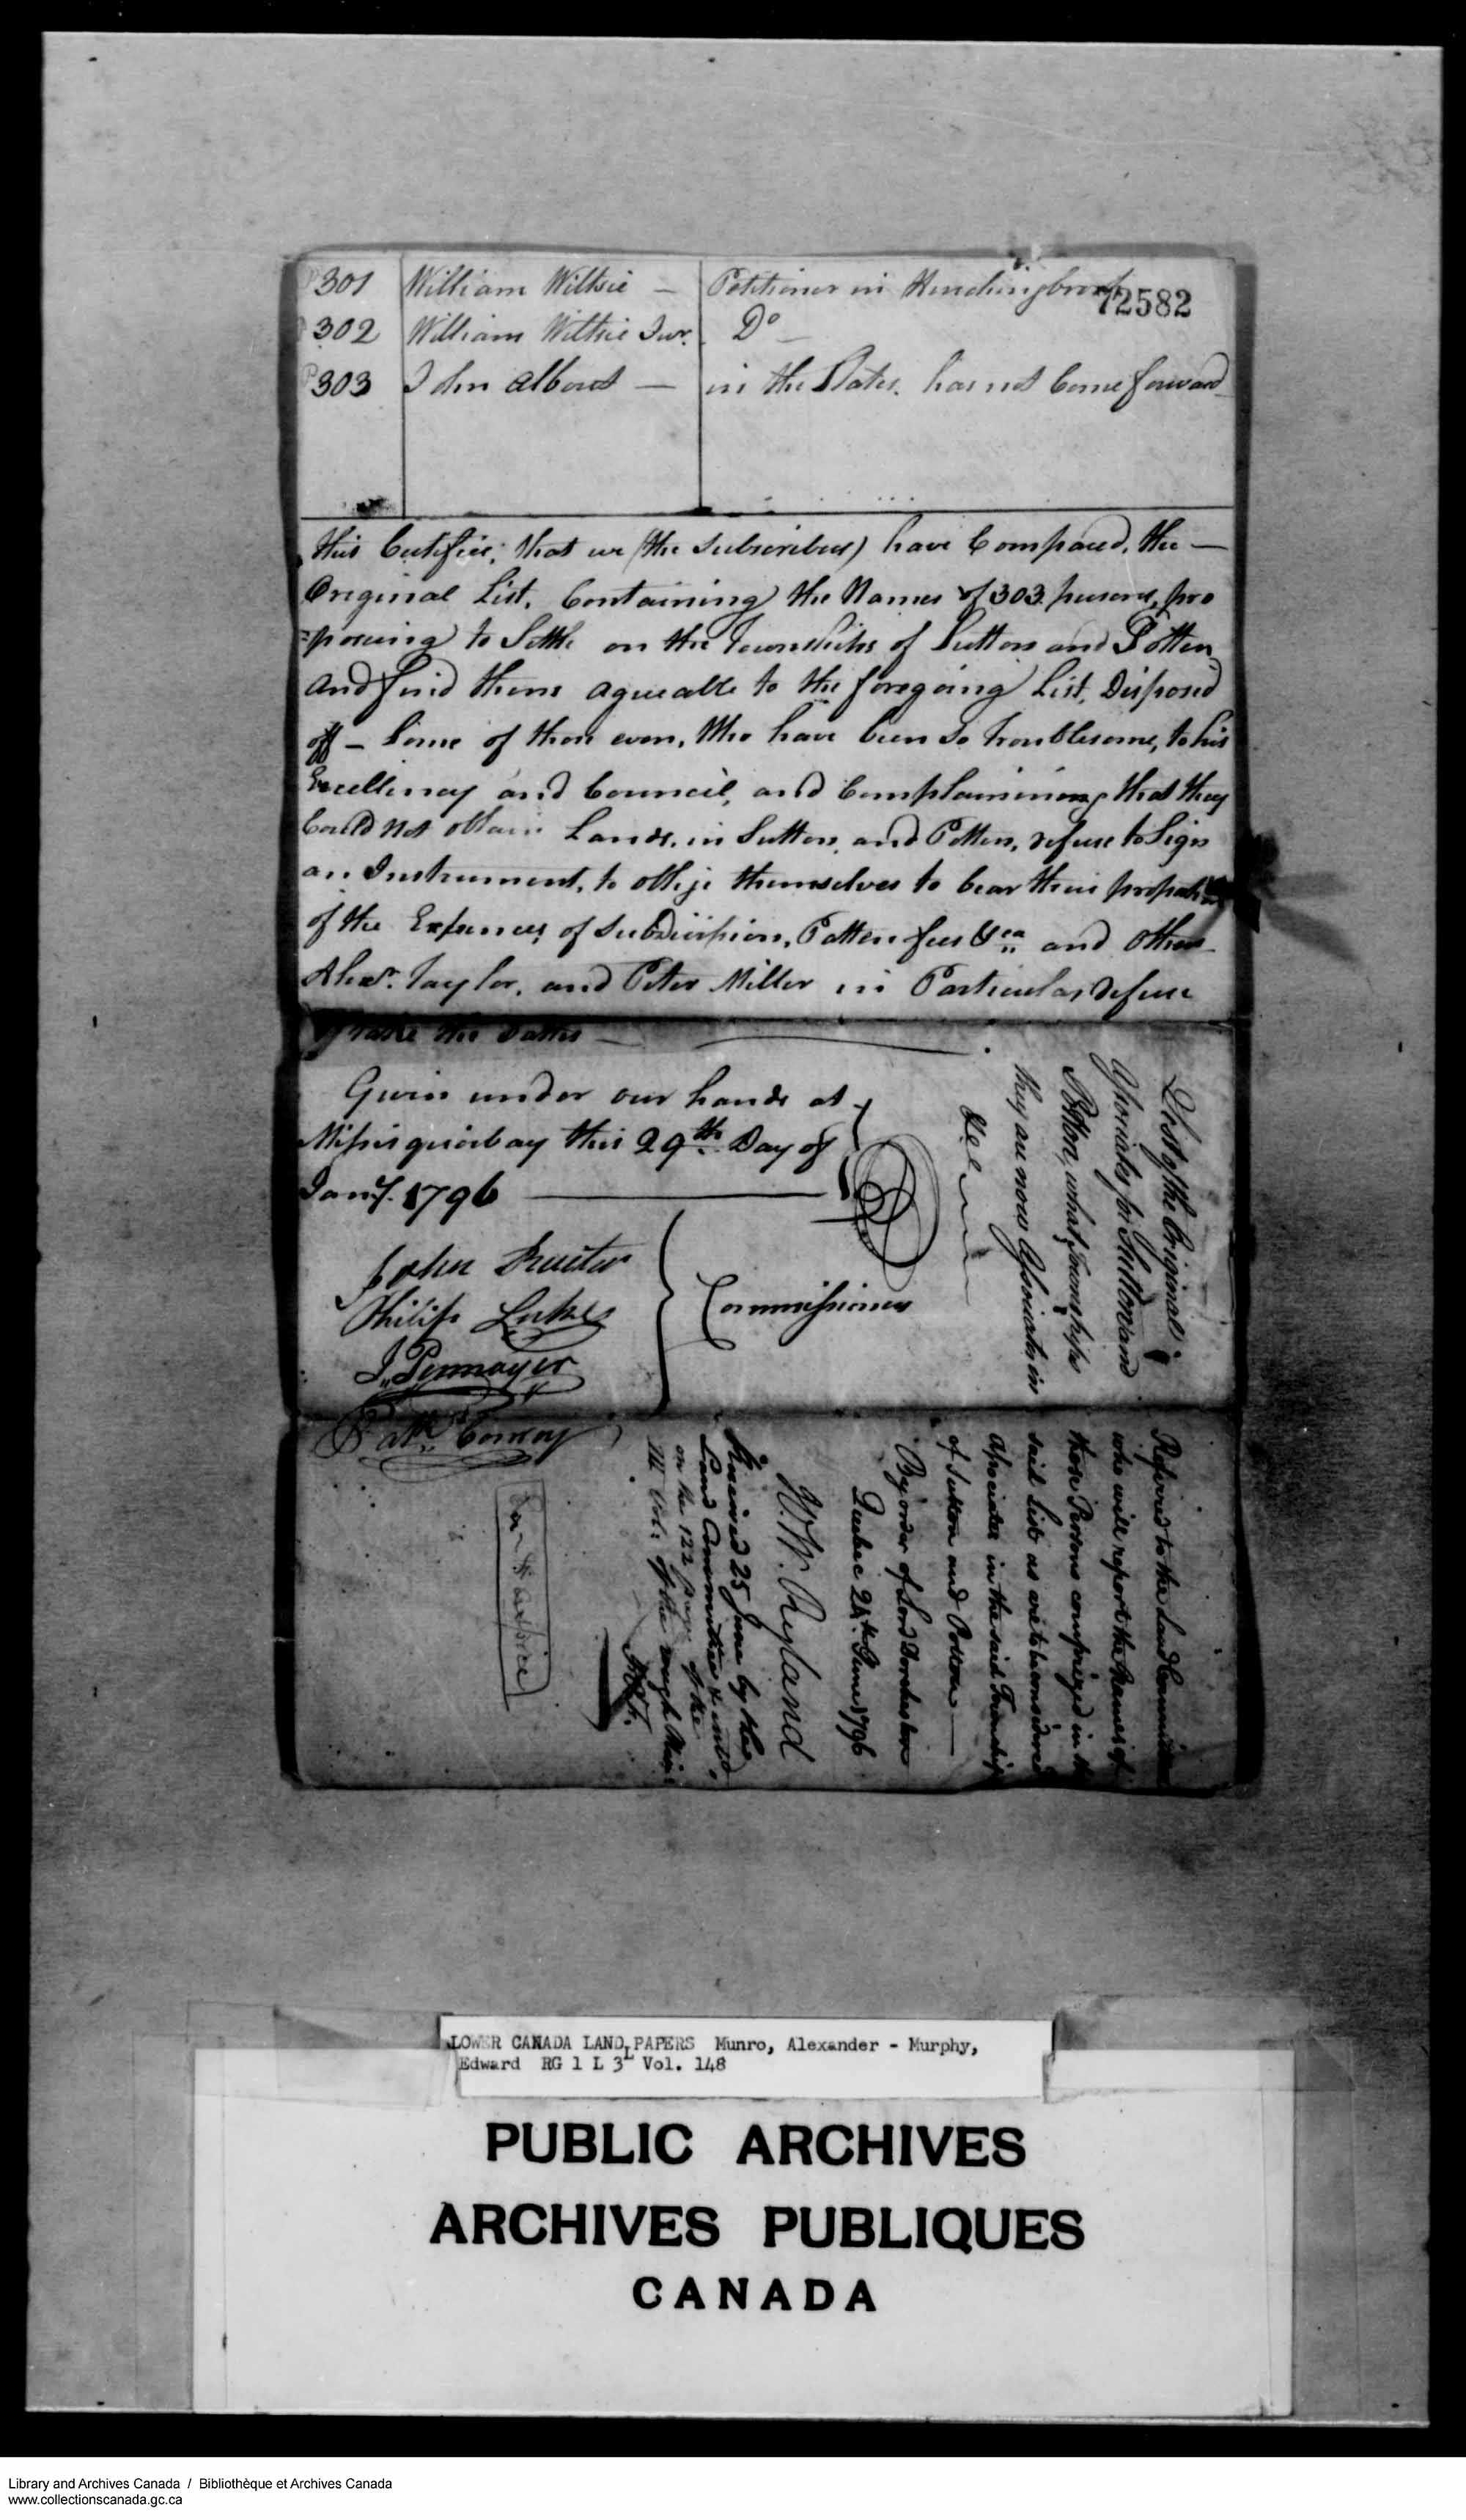 Digitized page of  for Image No.: e008718208